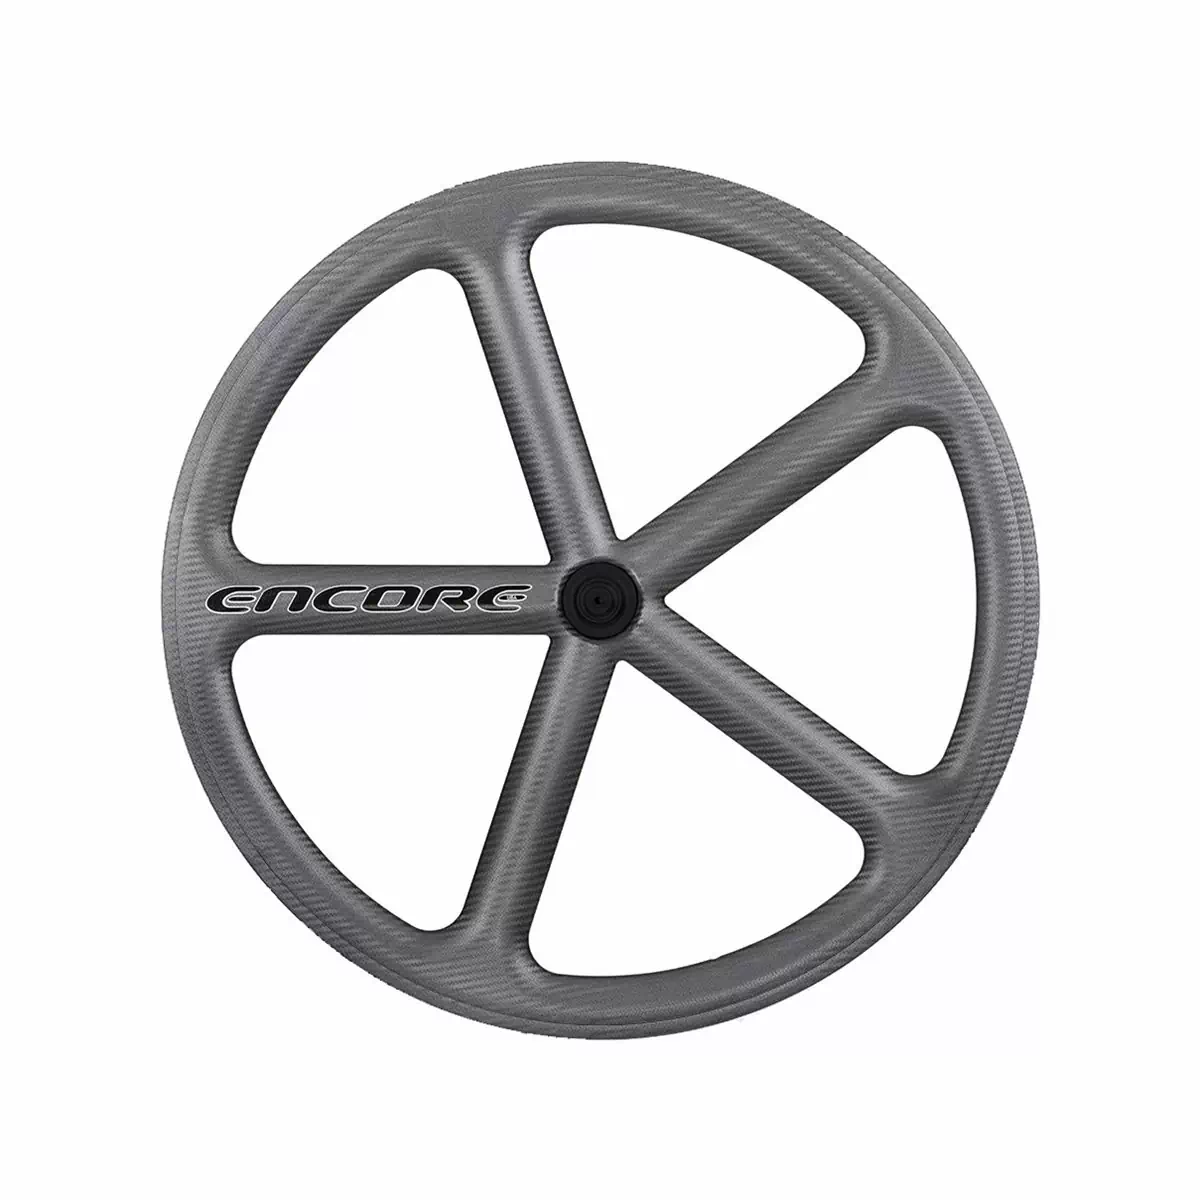 rear wheel 700c track 5 spokes carbon weave charcoal nmsw - image